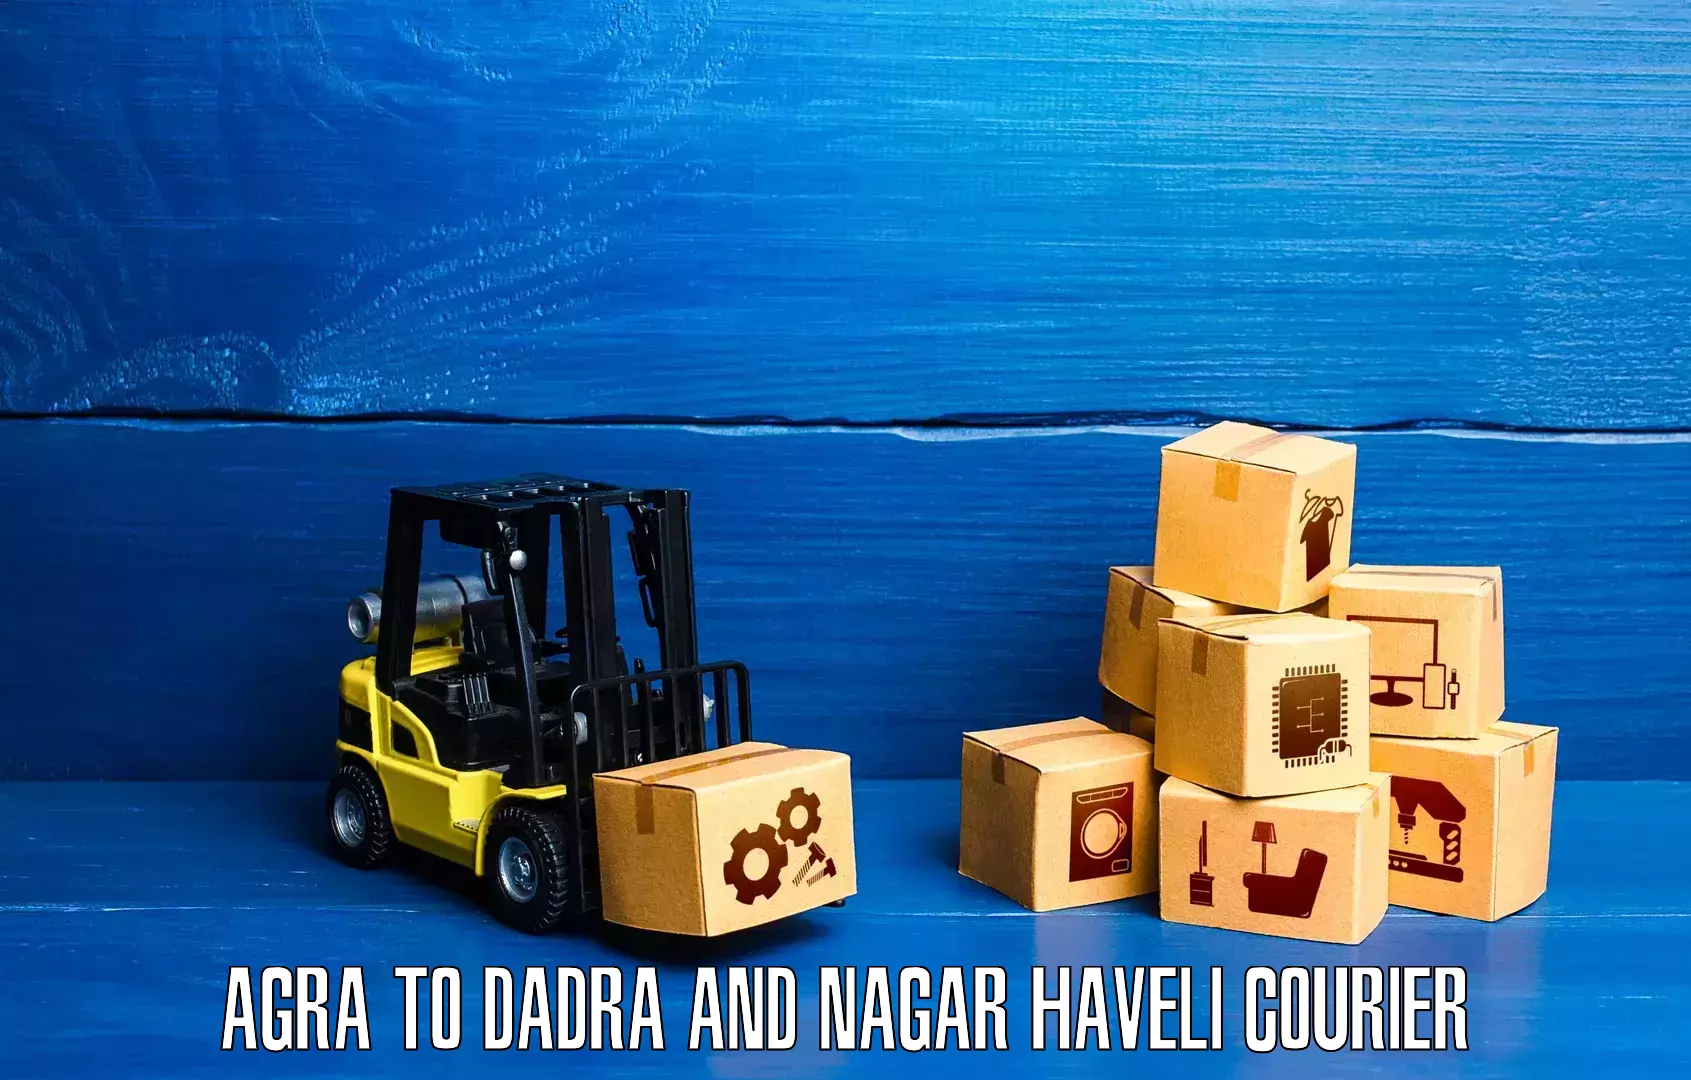 Business delivery service Agra to Dadra and Nagar Haveli